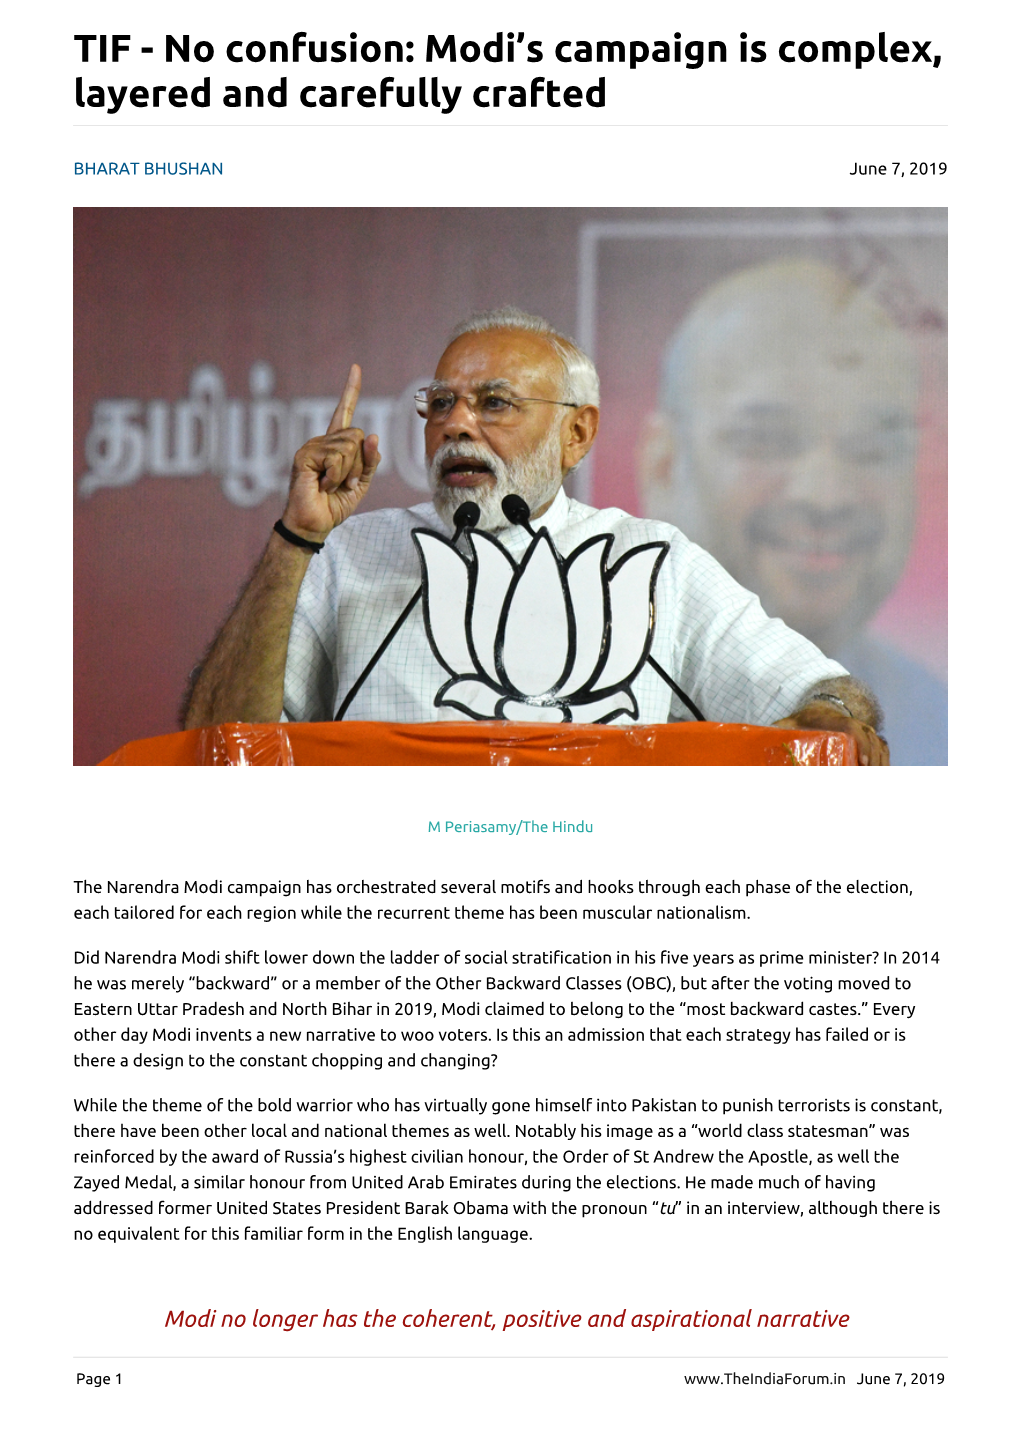 Modi's Campaign Is Complex, Layered and Carefully Crafted